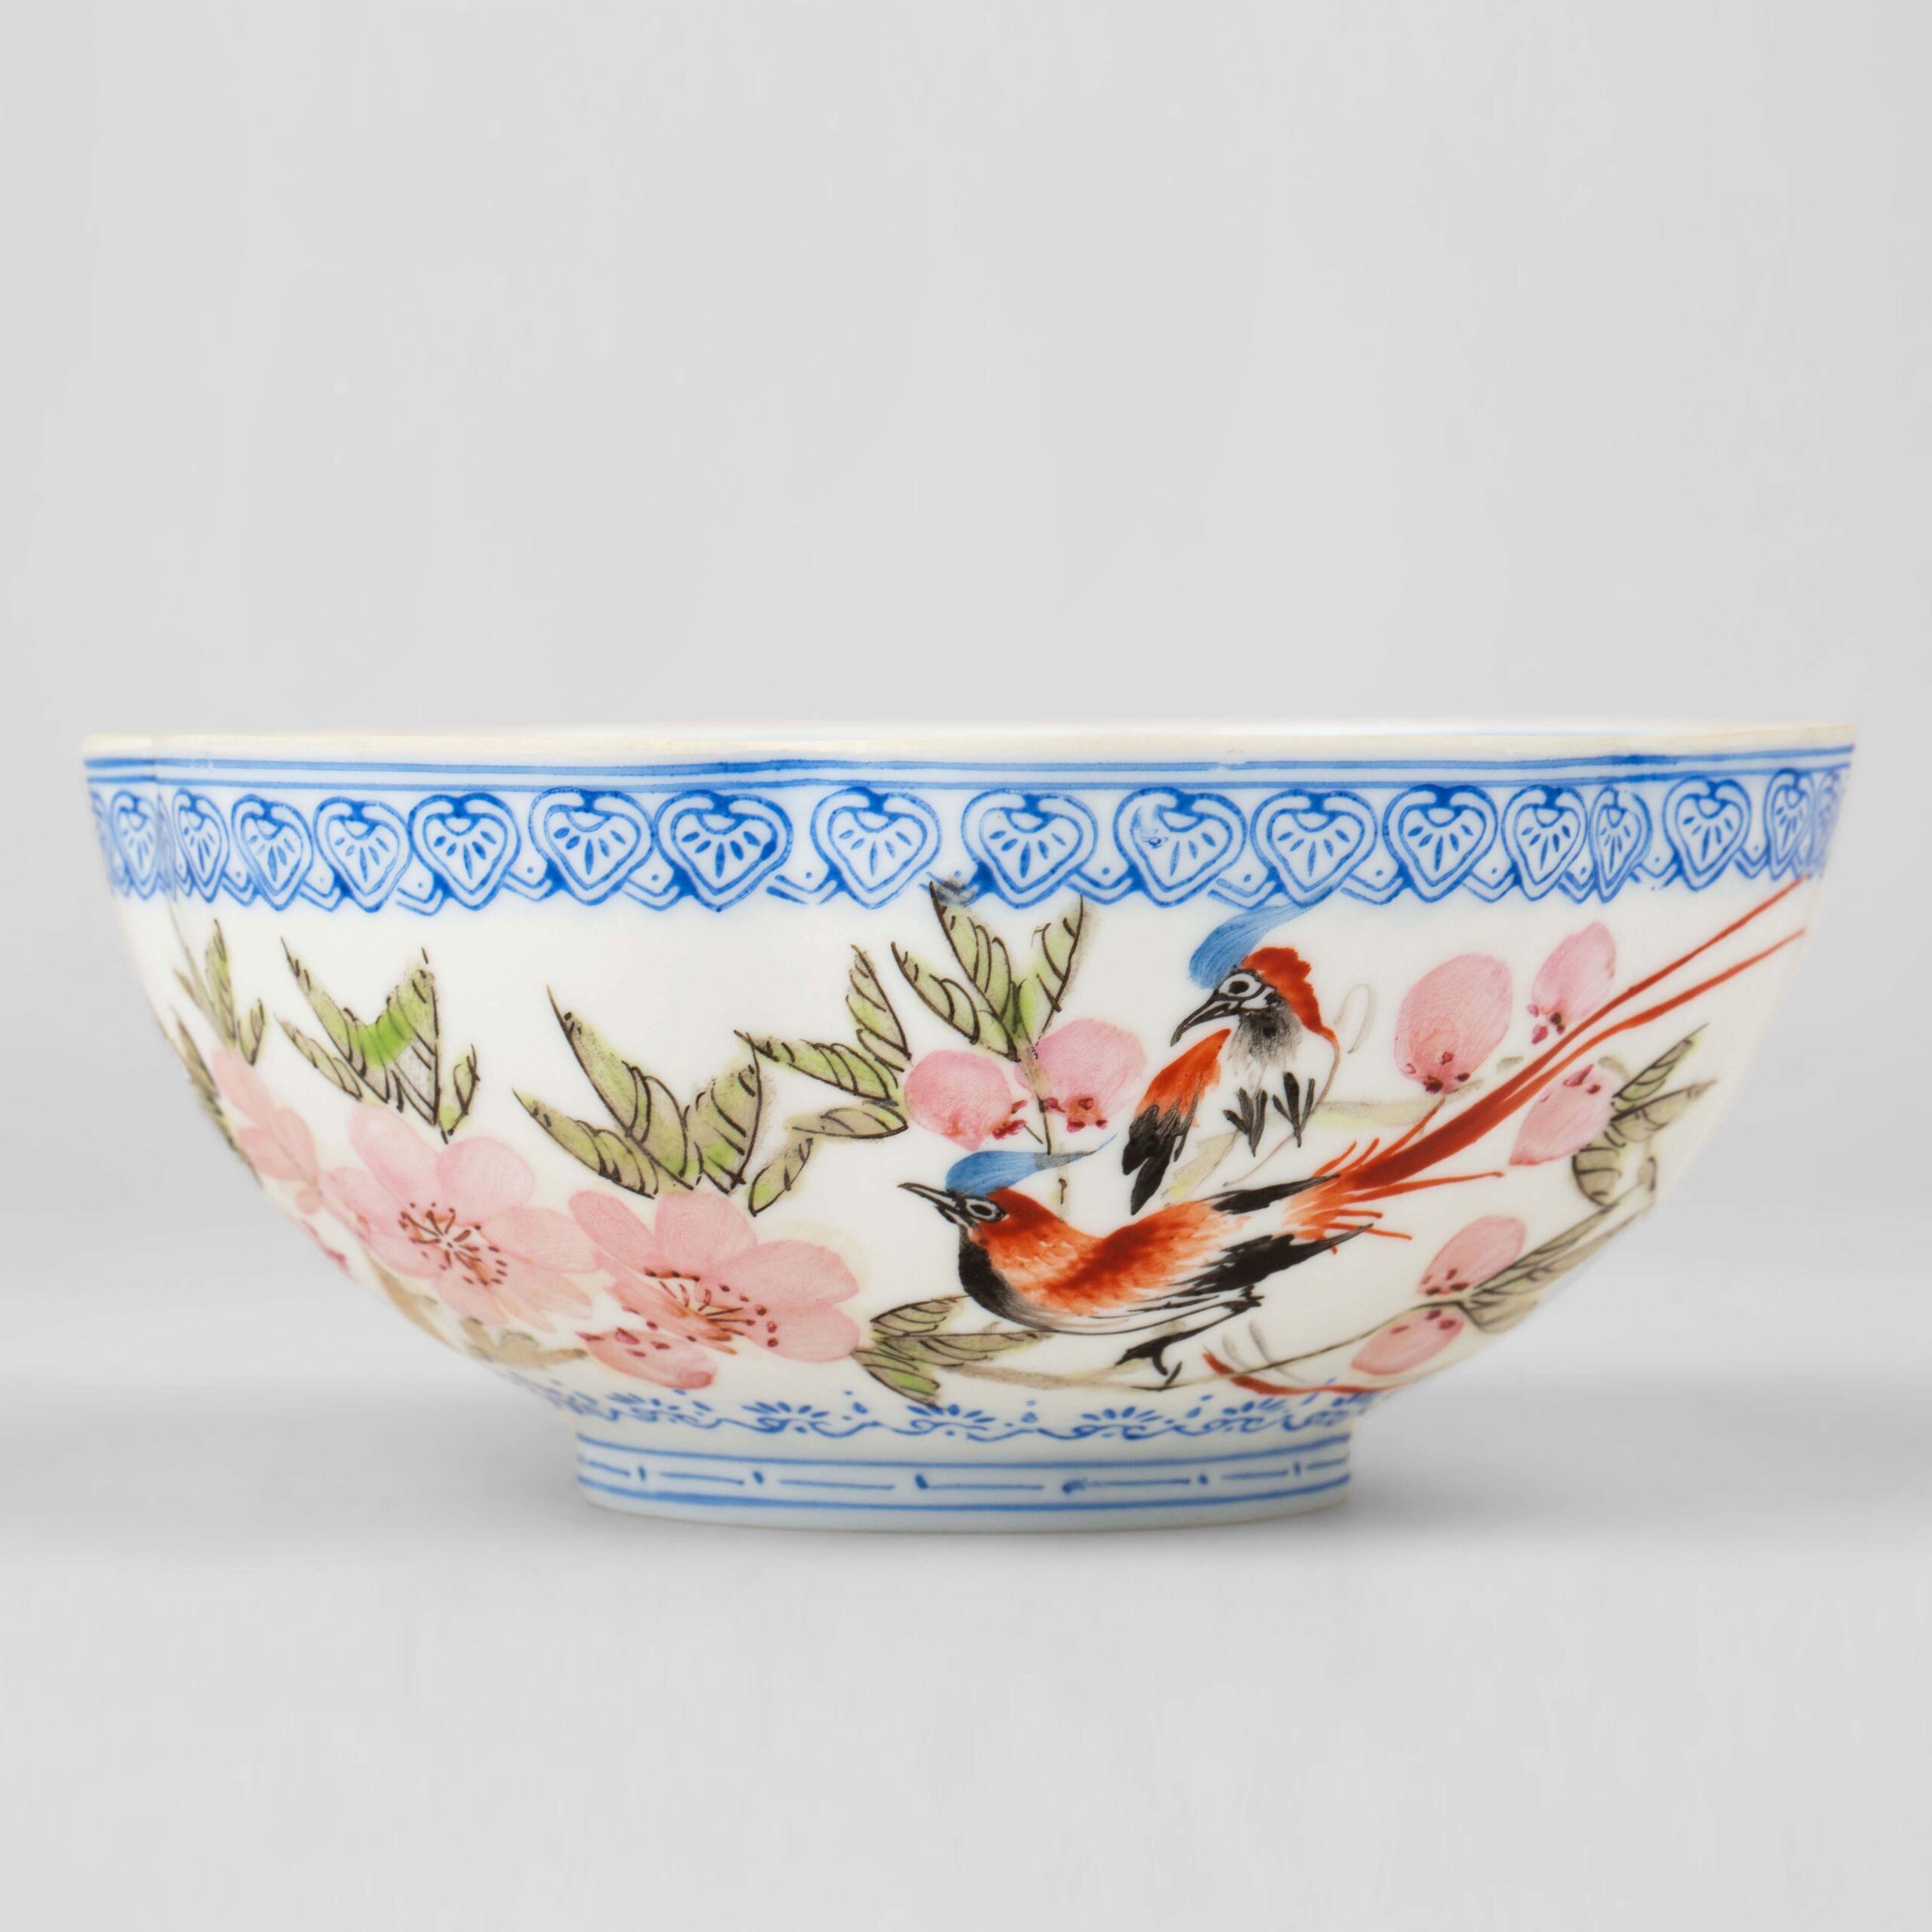 Jingdezhen made Thin bodied porcelain lotus mouth flower and bird 